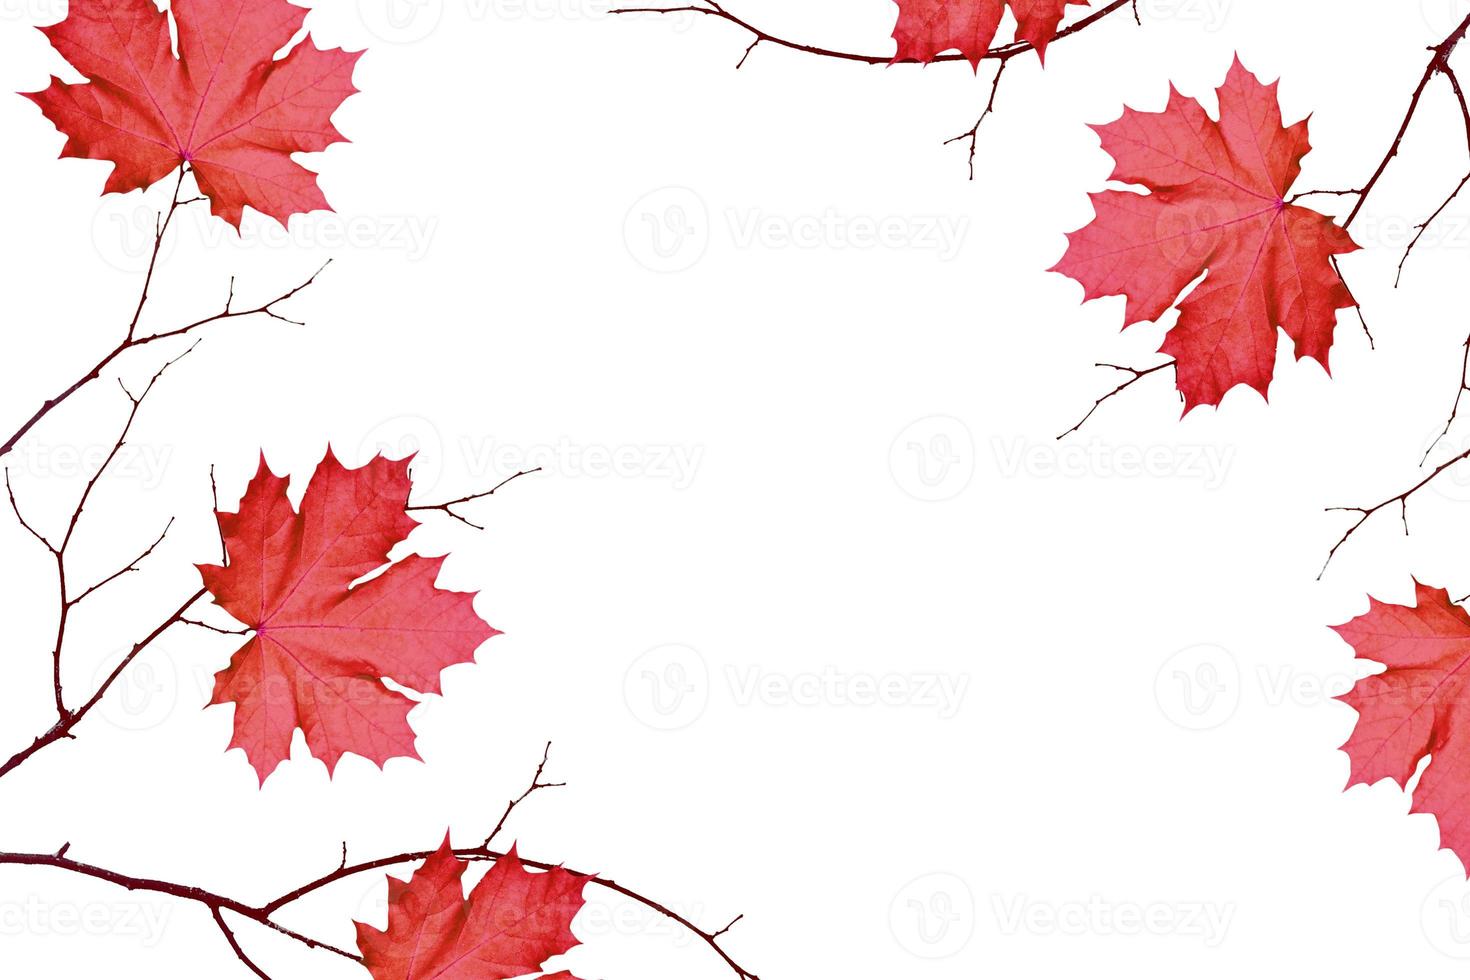 Bright colorful autumn leaves photo